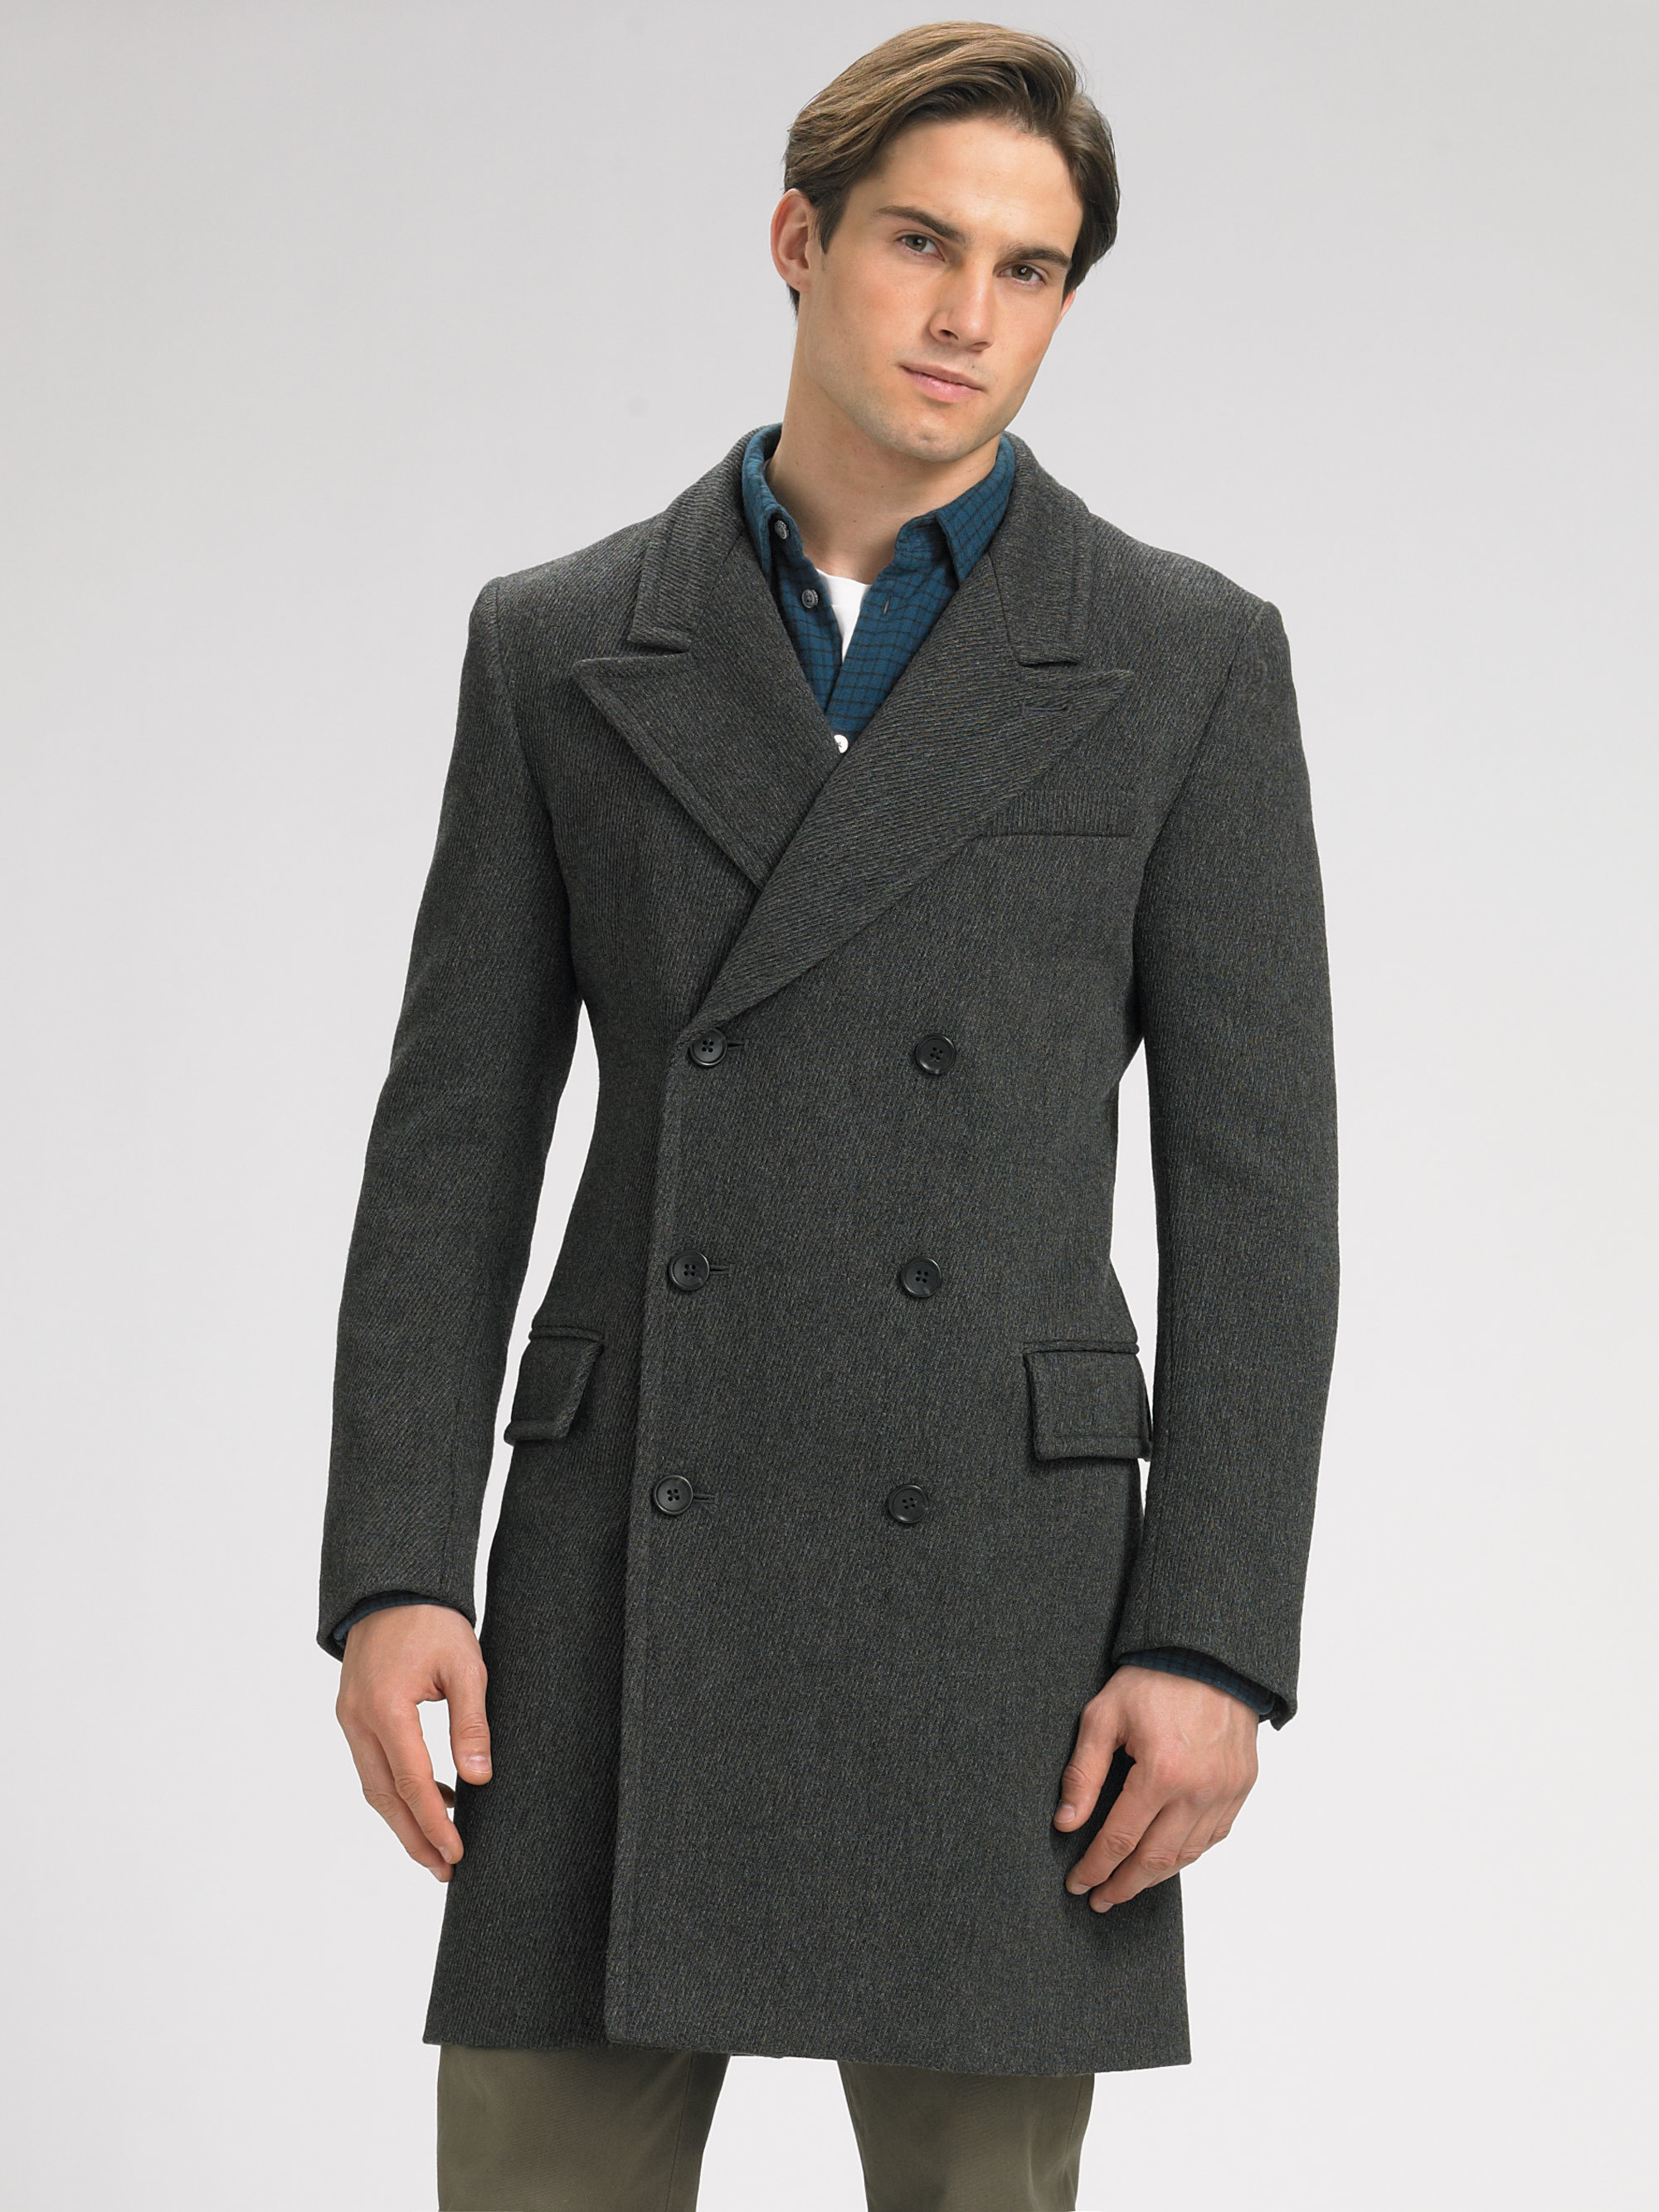 Marc by marc jacobs Perry Wool Overcoat in Gray for Men | Lyst